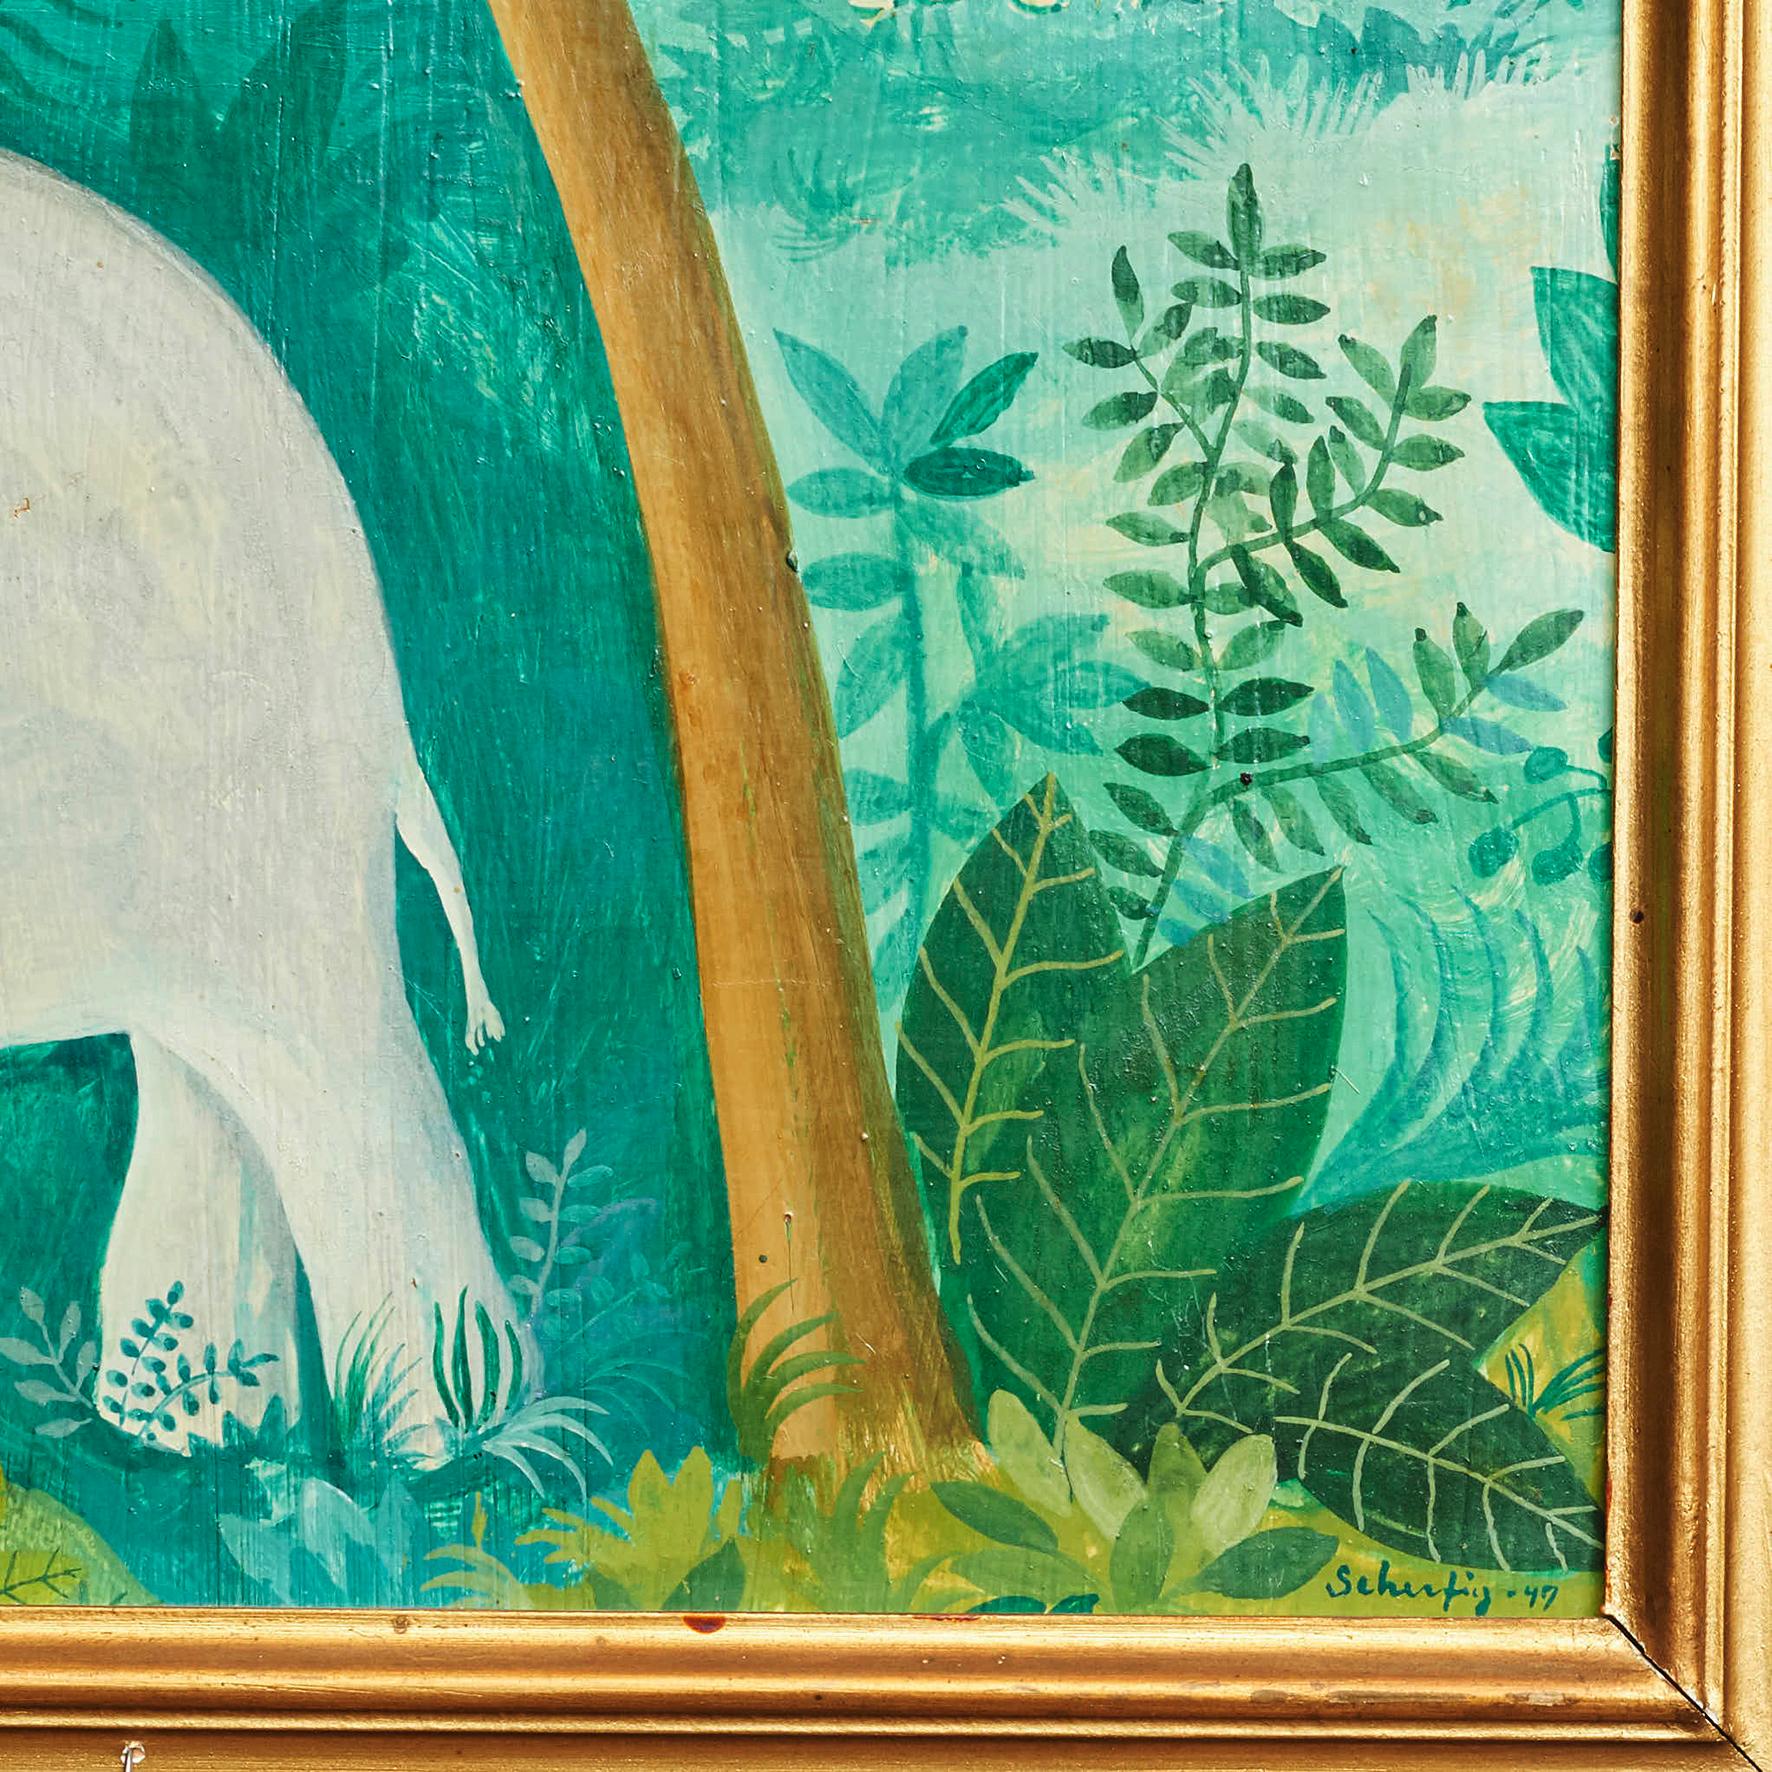 Hand-Painted Original Hans Scherfig Painting of White Elephants in the Jungle, Denmark, 1947